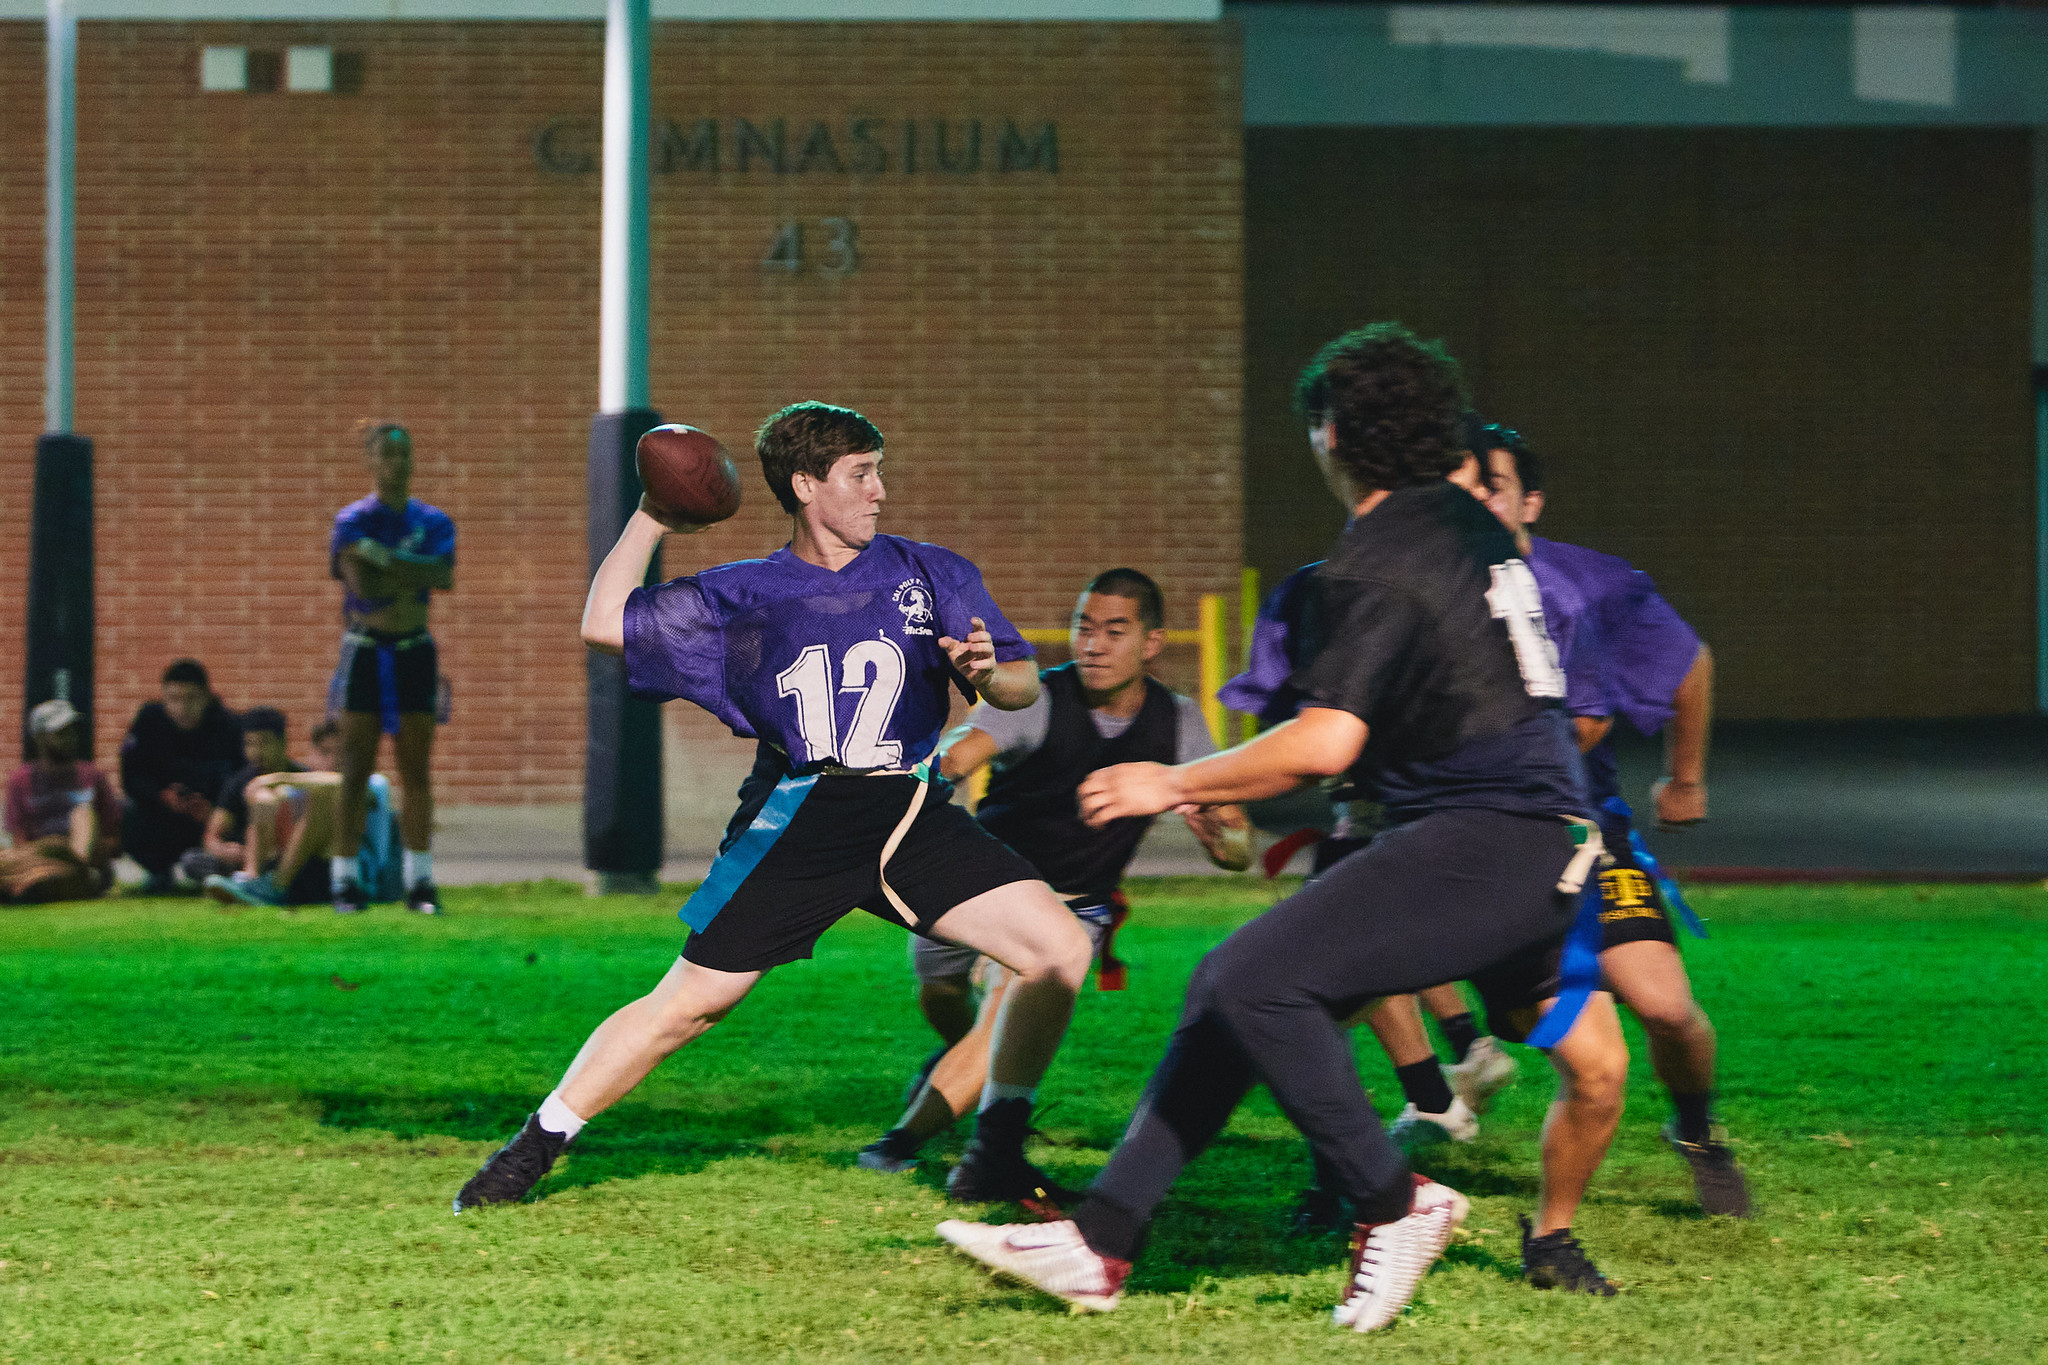 One student throwing a football and others attempting to grab his flag in a game of football.